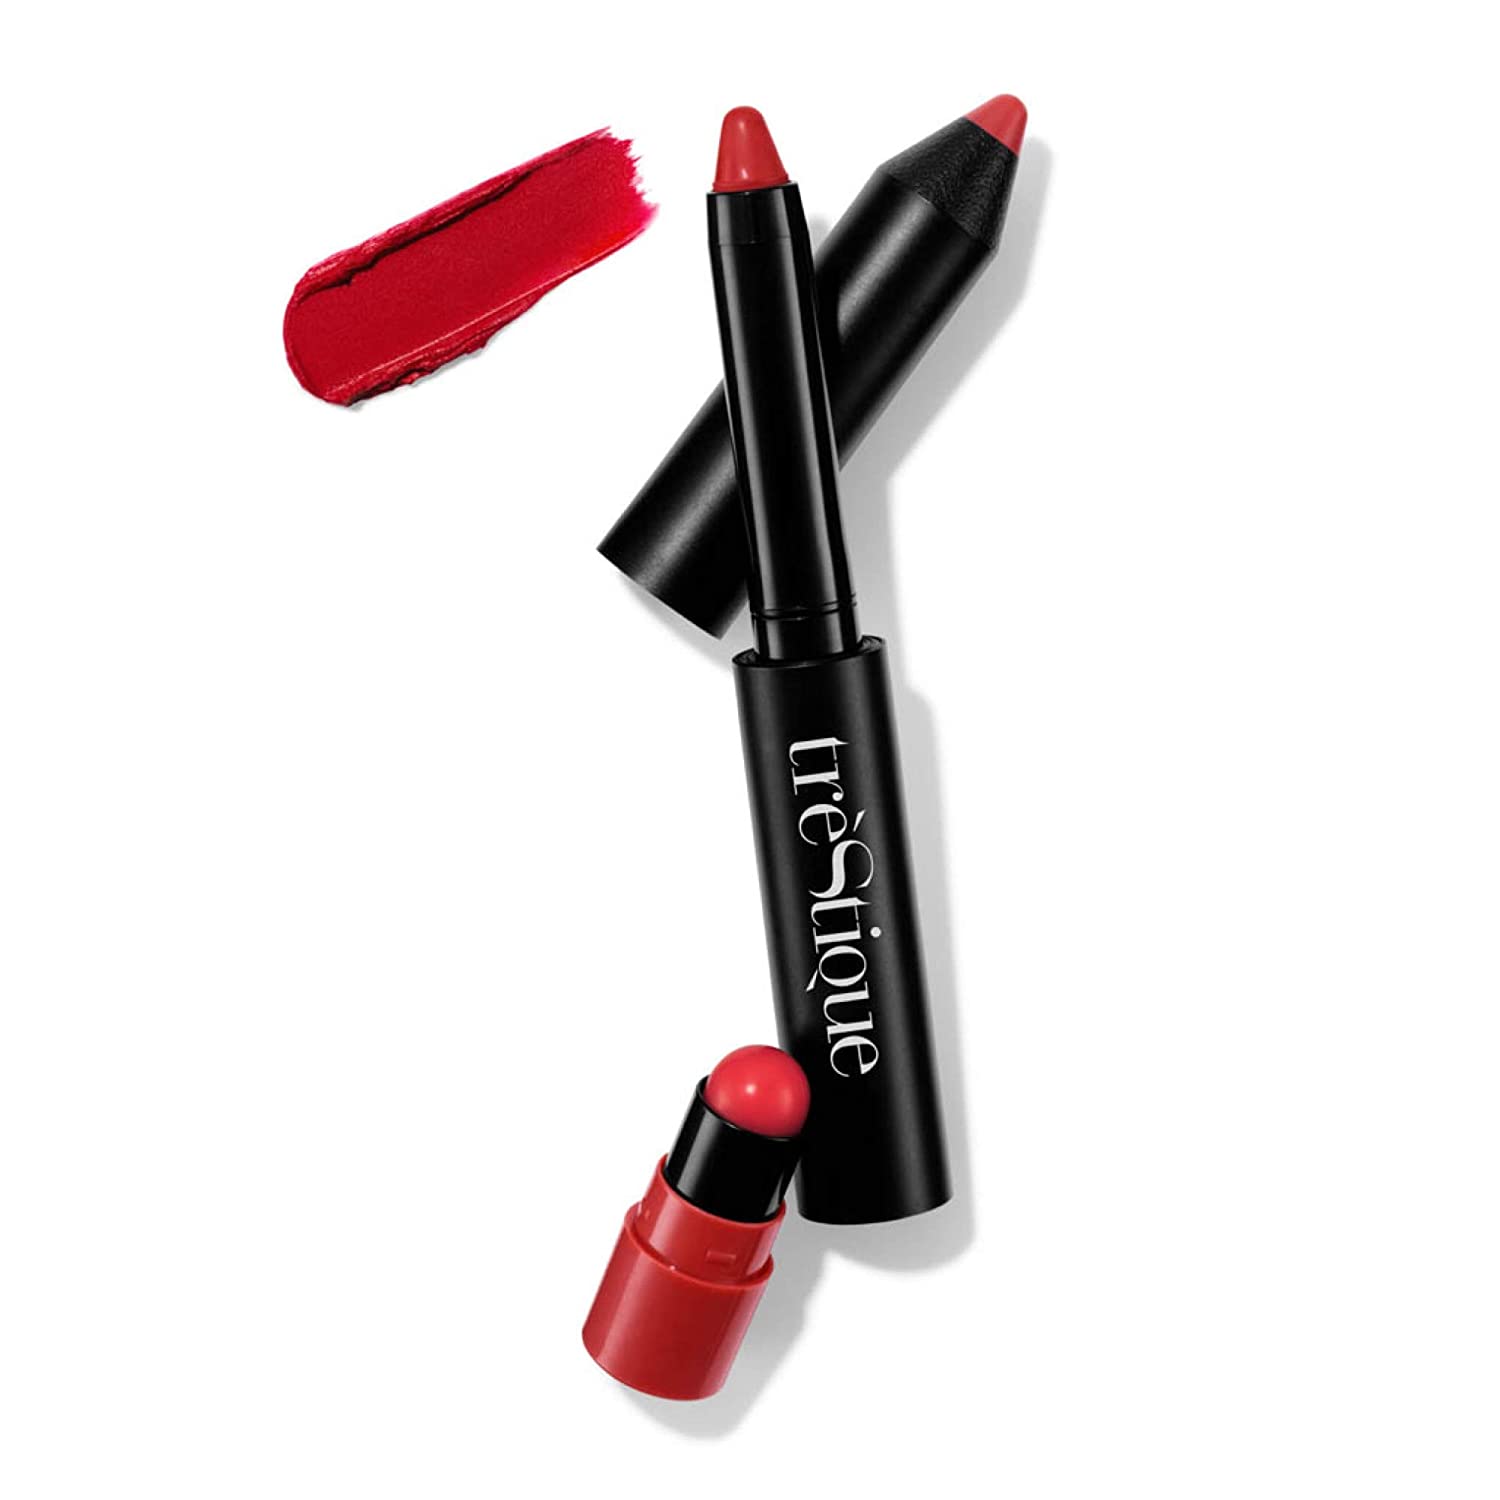 ''treStiQue Matte Lip Crayon, Matte LIPSTICK With Built-in Lip Gloss Balm, 2-in-1 Lip Liner Set With 